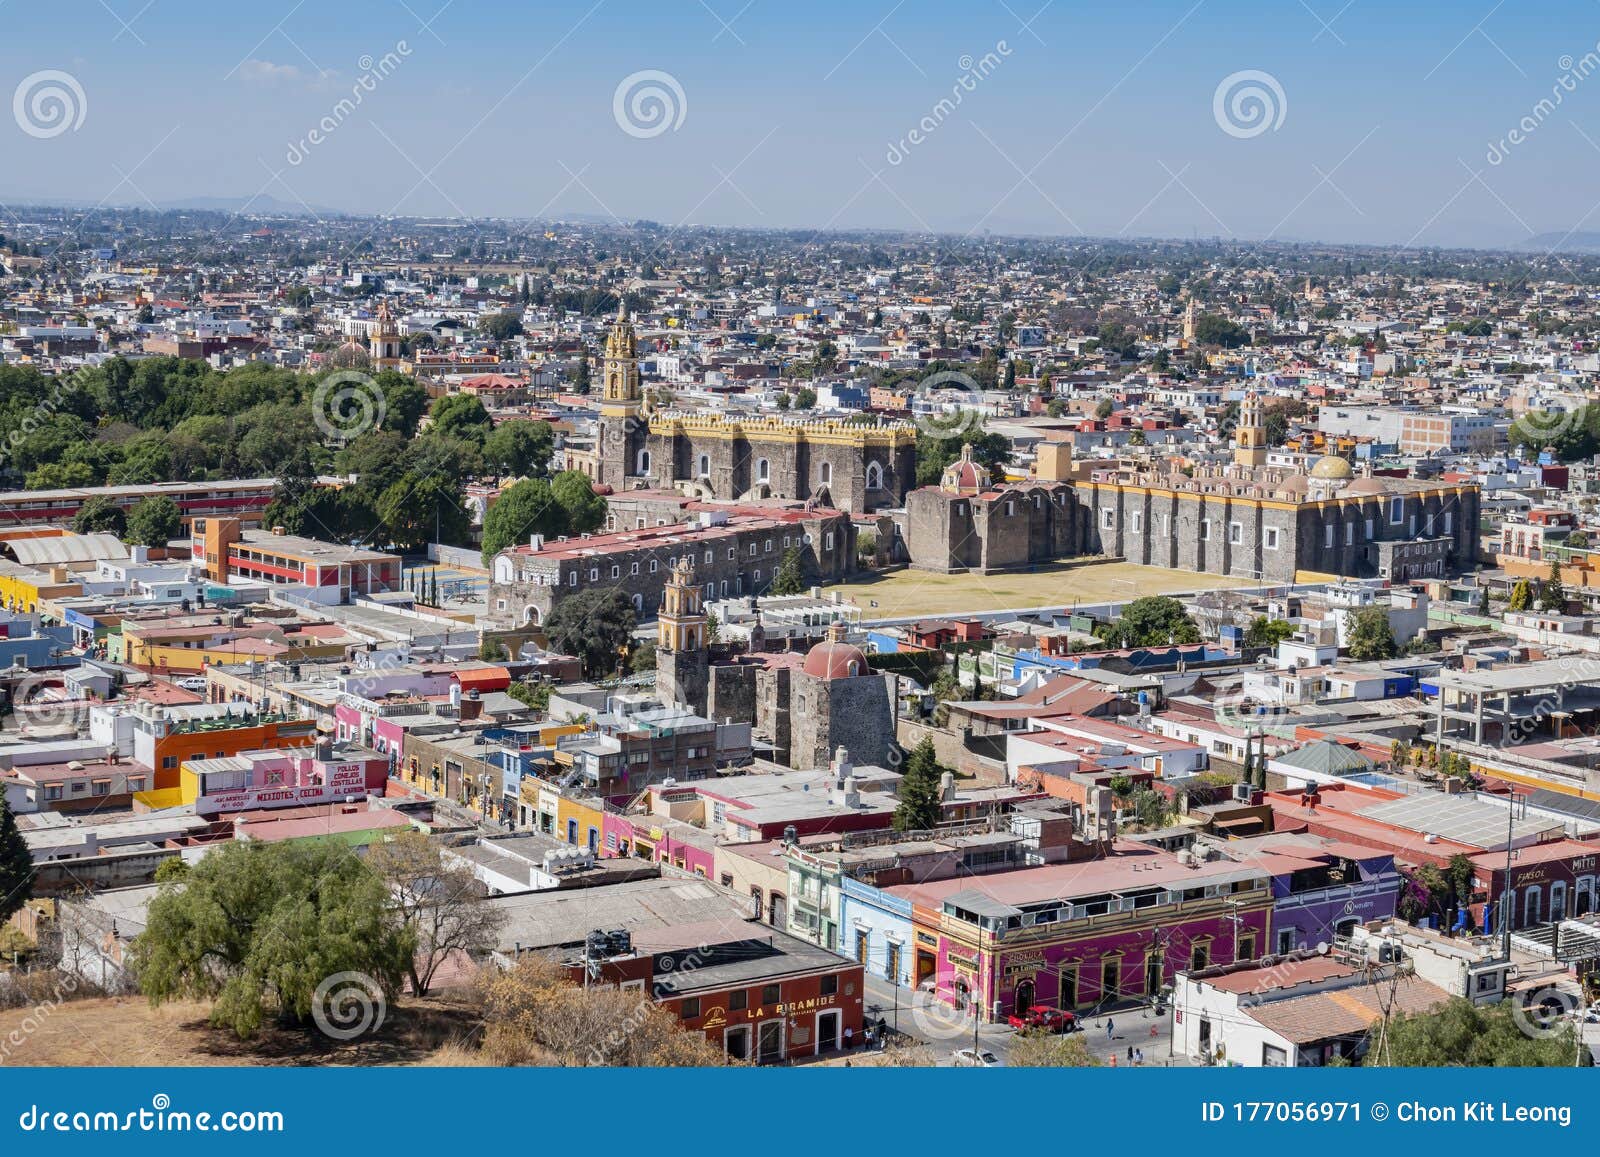 aerial view cityscape of cholula with capilla real o de naturales